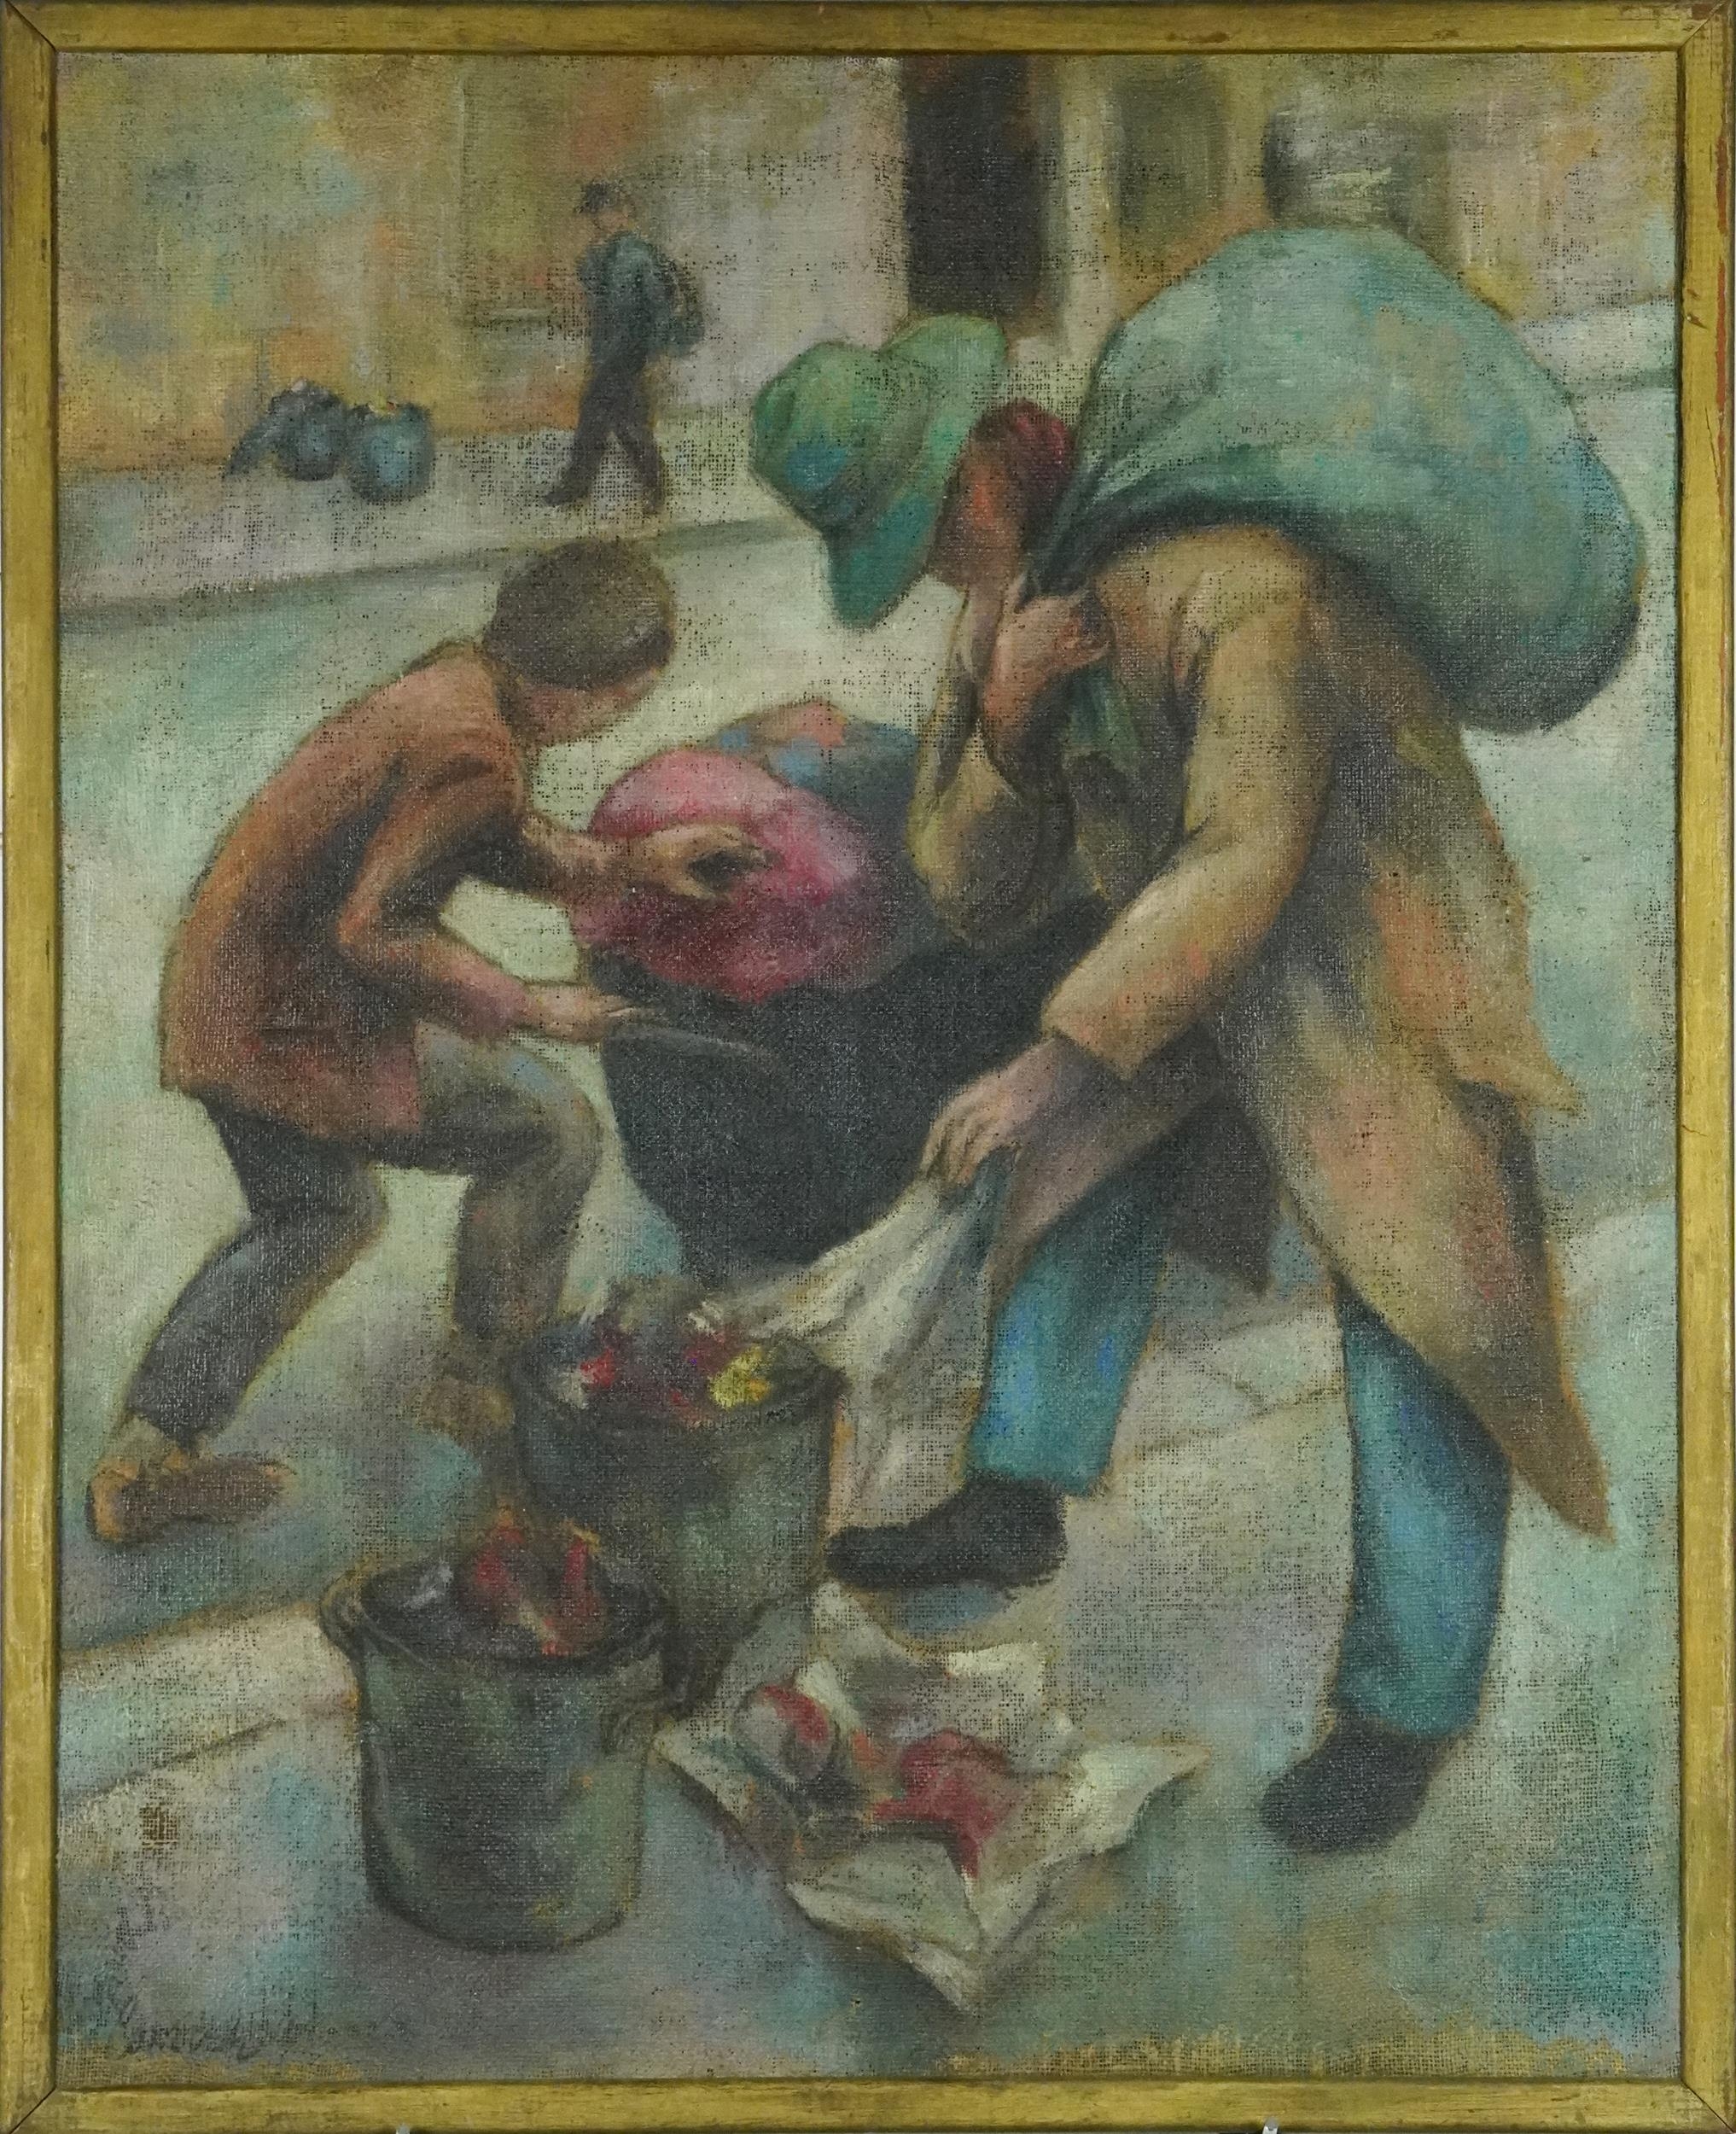 Attributed to Norman Cornish - Street life, post-war British oil on canvas, inscribed verso, framed, - Image 2 of 4